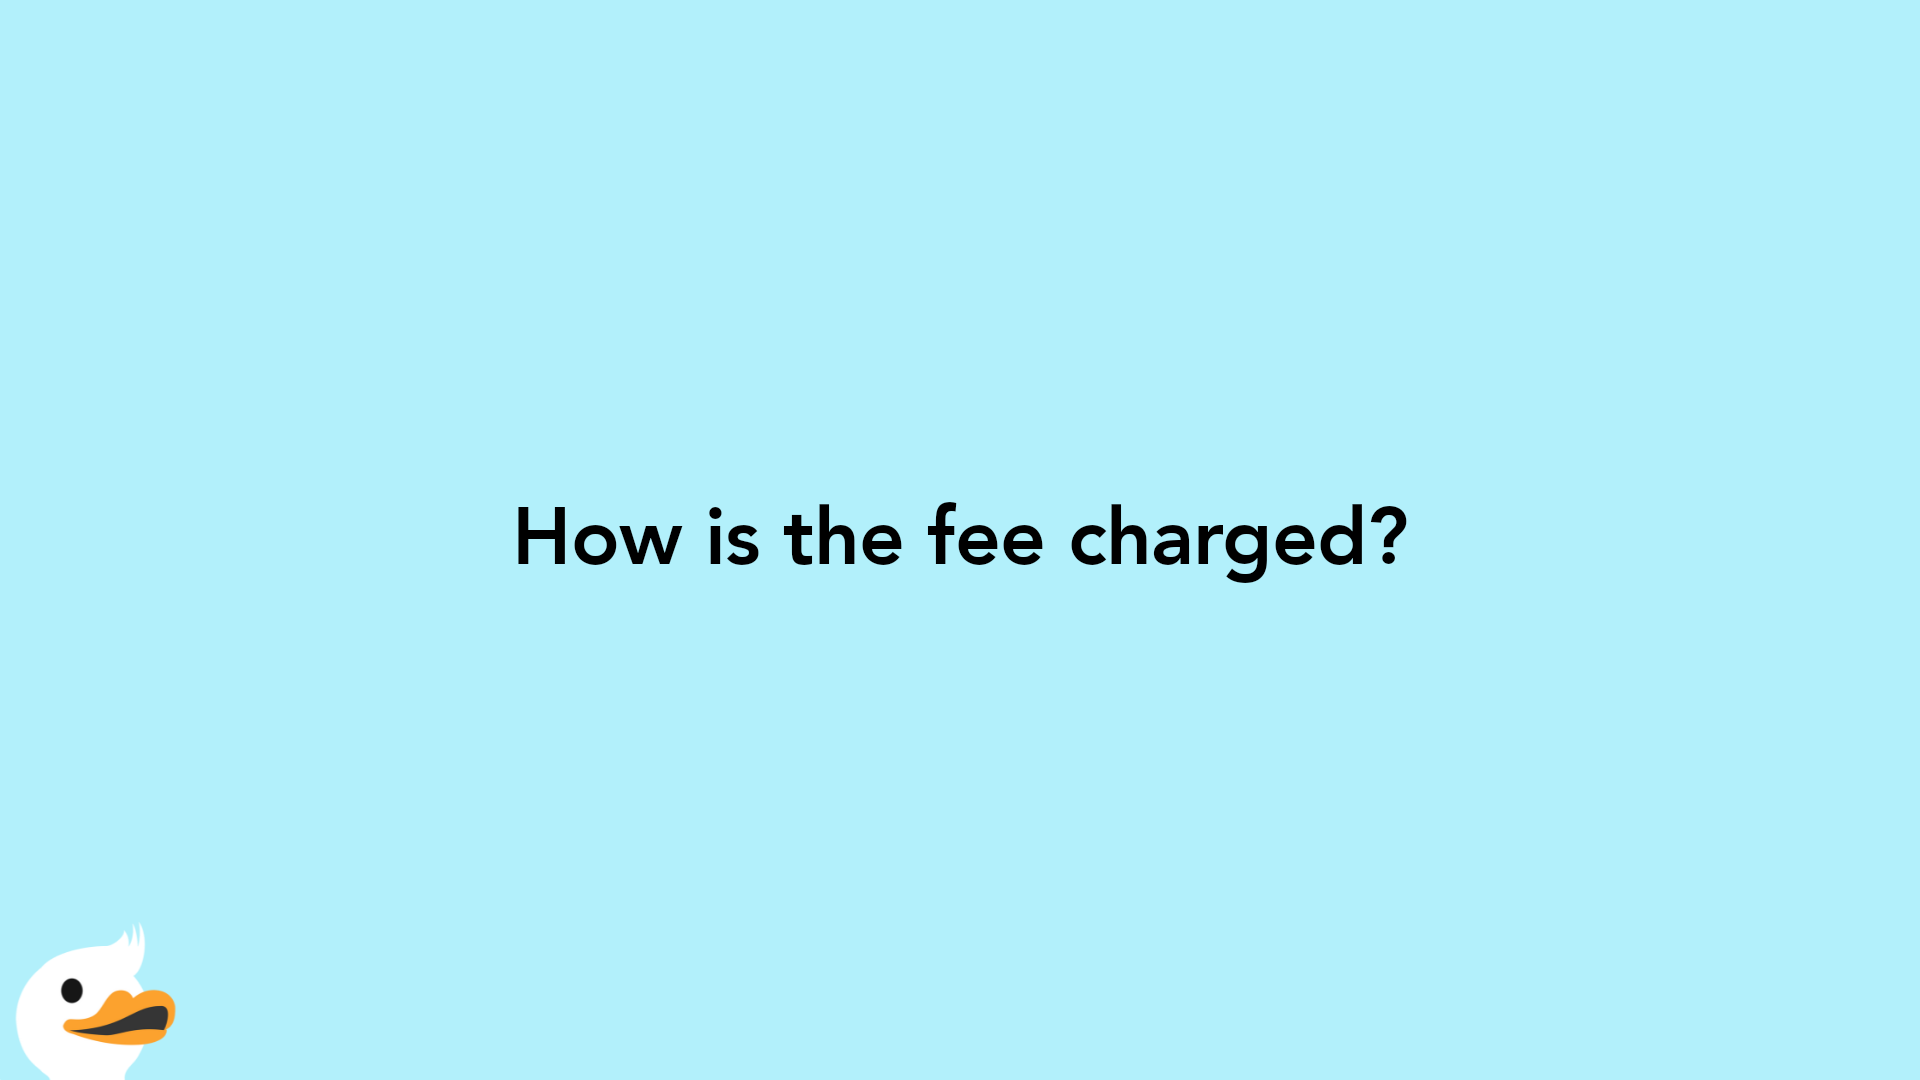 How is the fee charged?